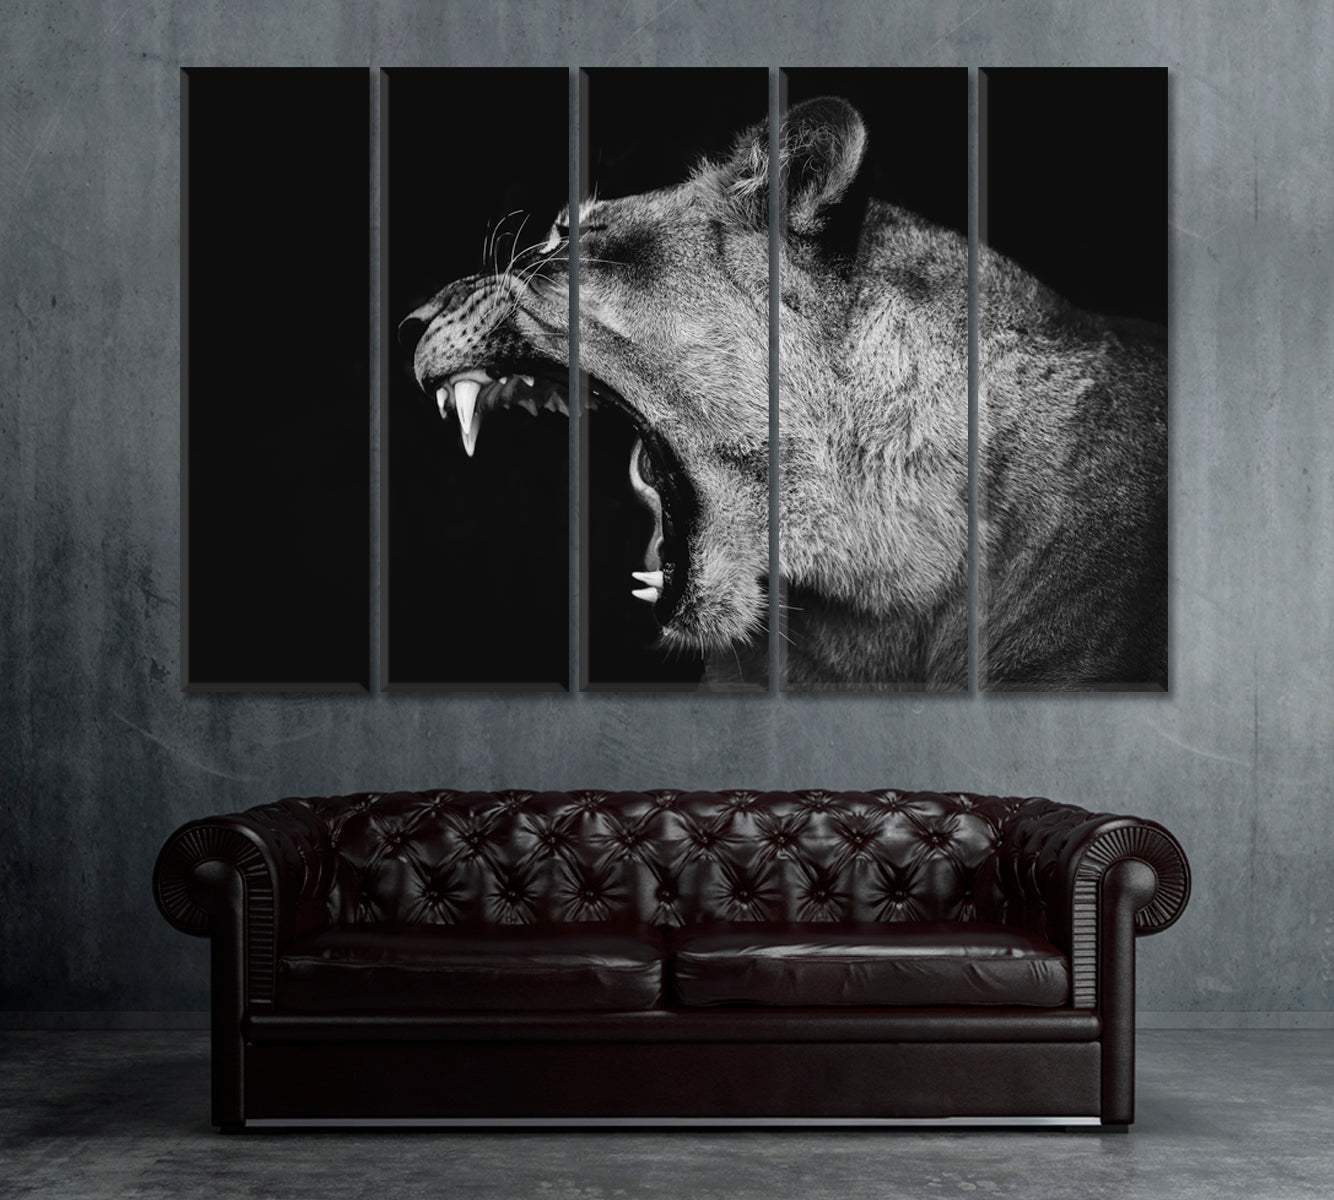 Yawning Lion Canvas Print ArtLexy 5 Panels 36"x24" inches 